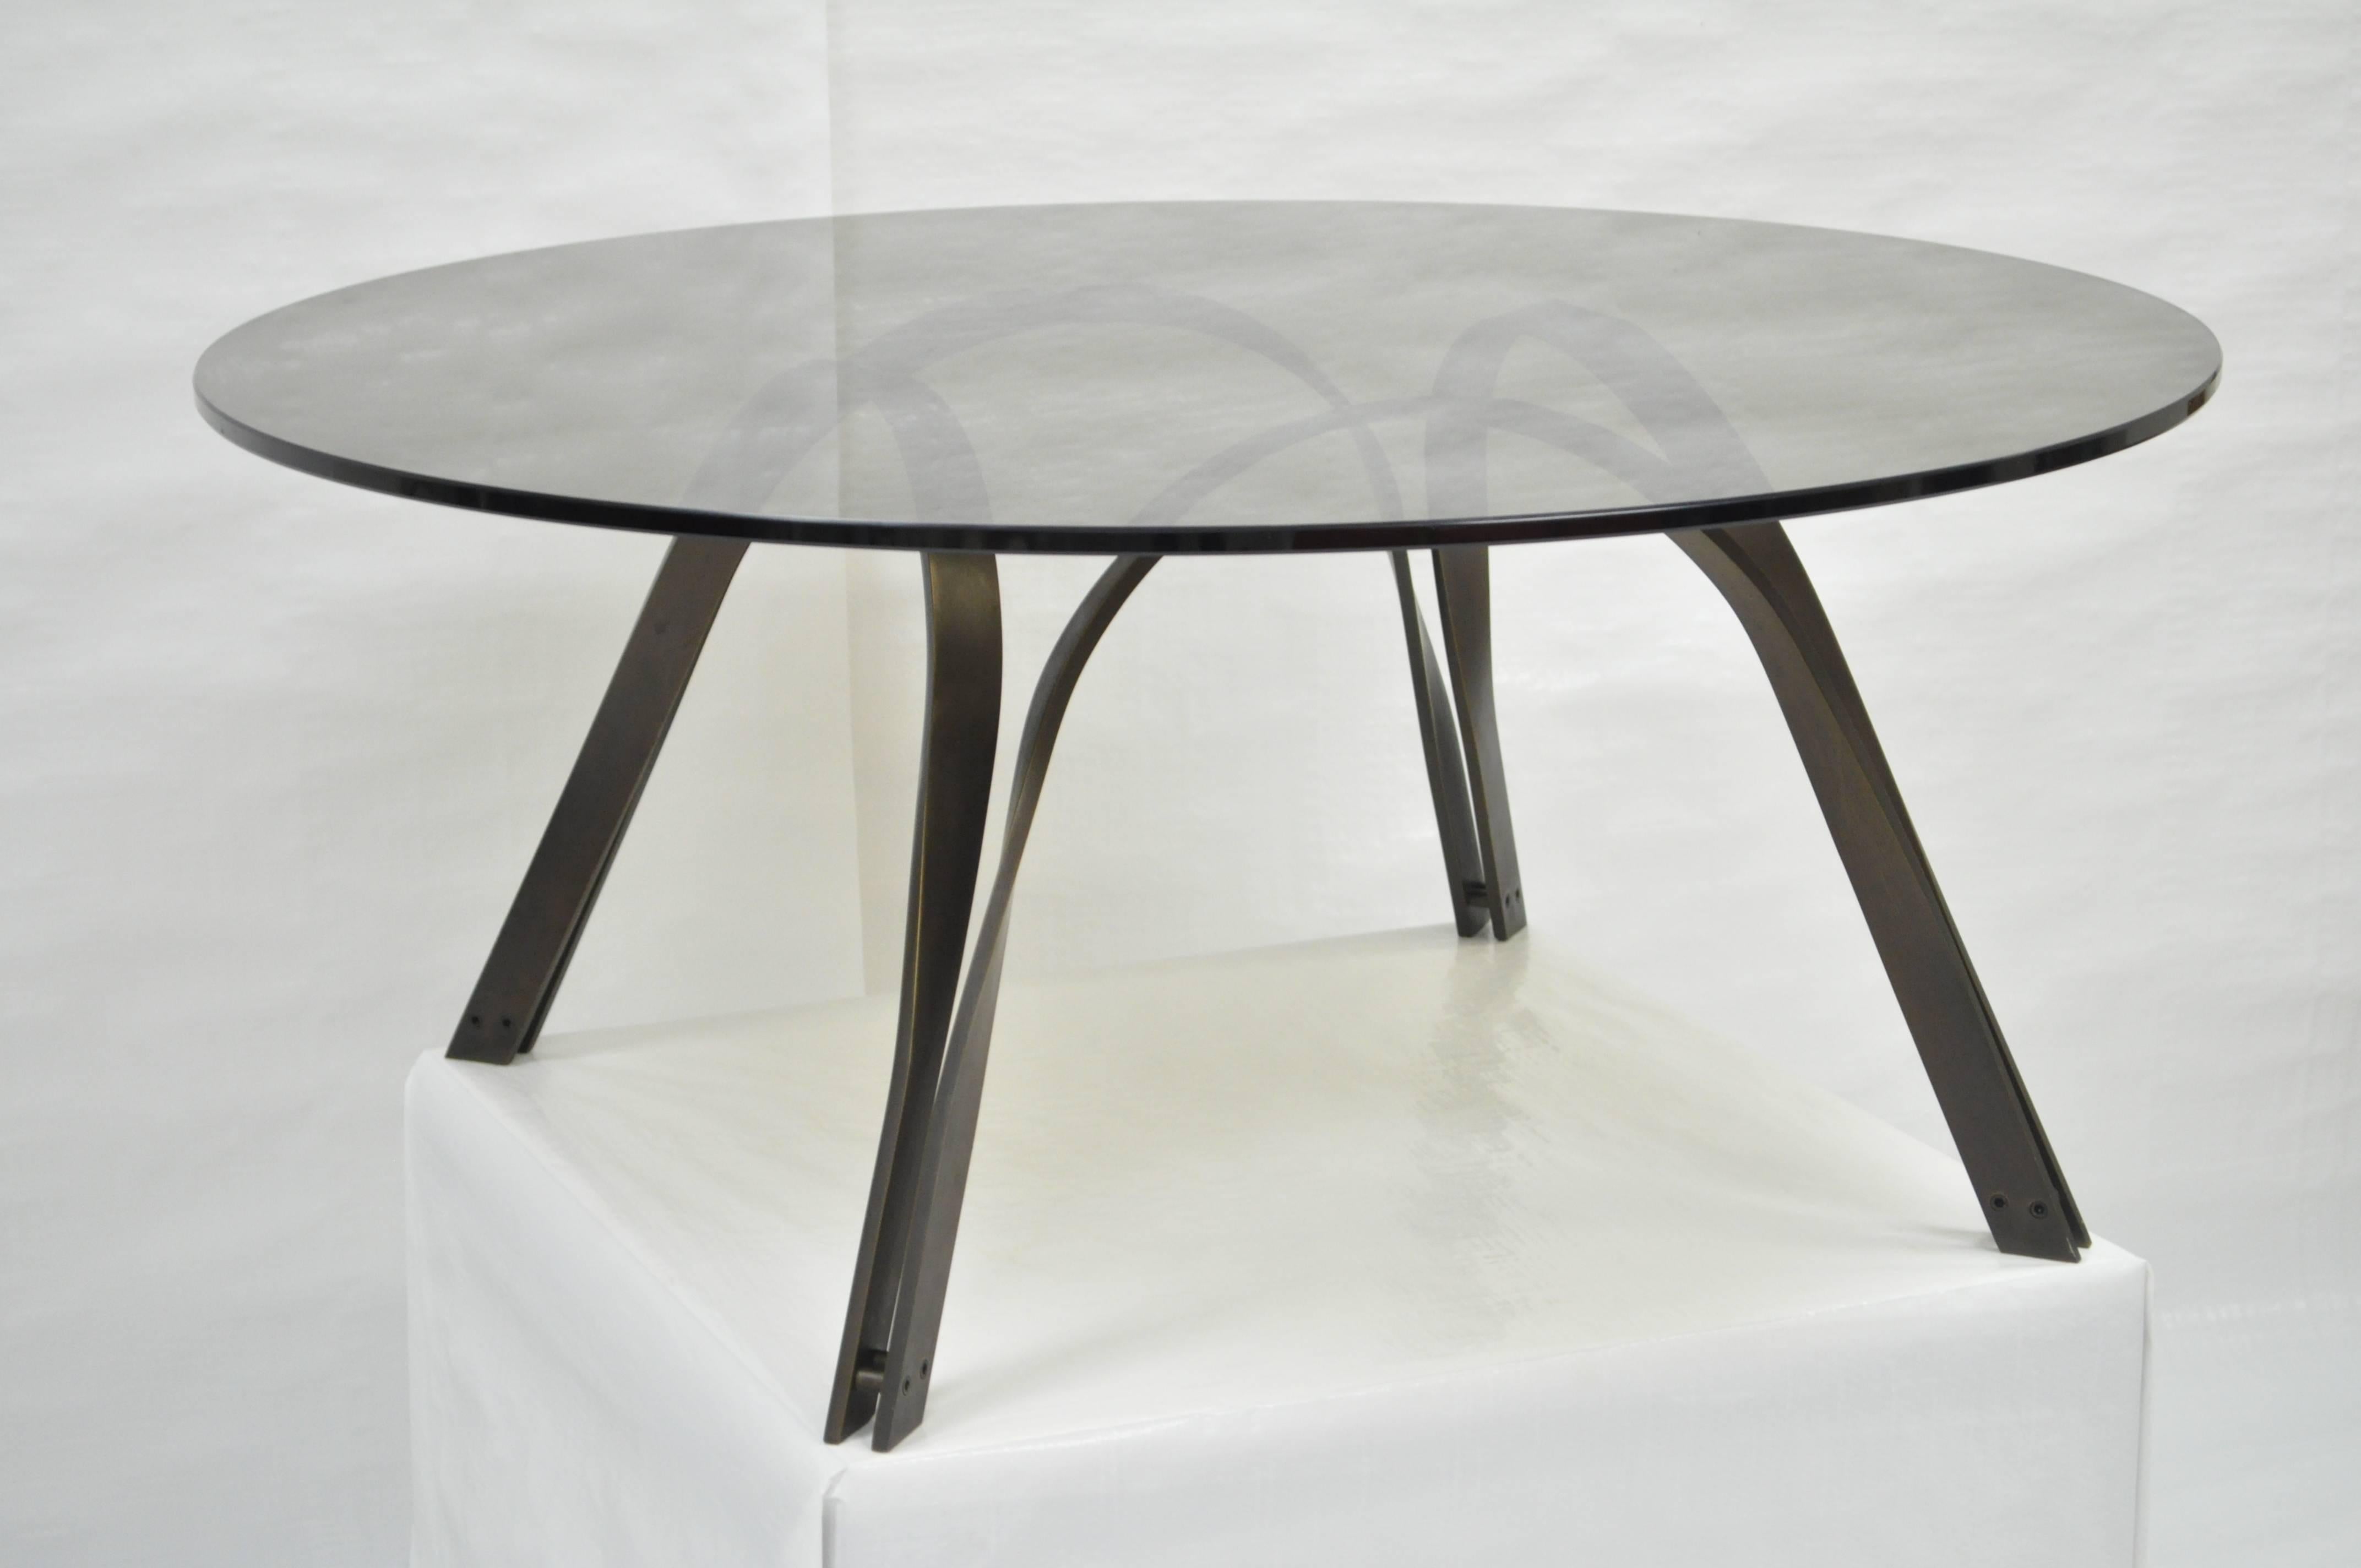 Vintage Mid-Century Modern sculptural heavy steel and smoked glass coffee table by Trimark in the manner of Roger Lee Sprunger for Dunbar. Item features a very rare bronze finish to the steel frame. Can be used facing up or down with examples